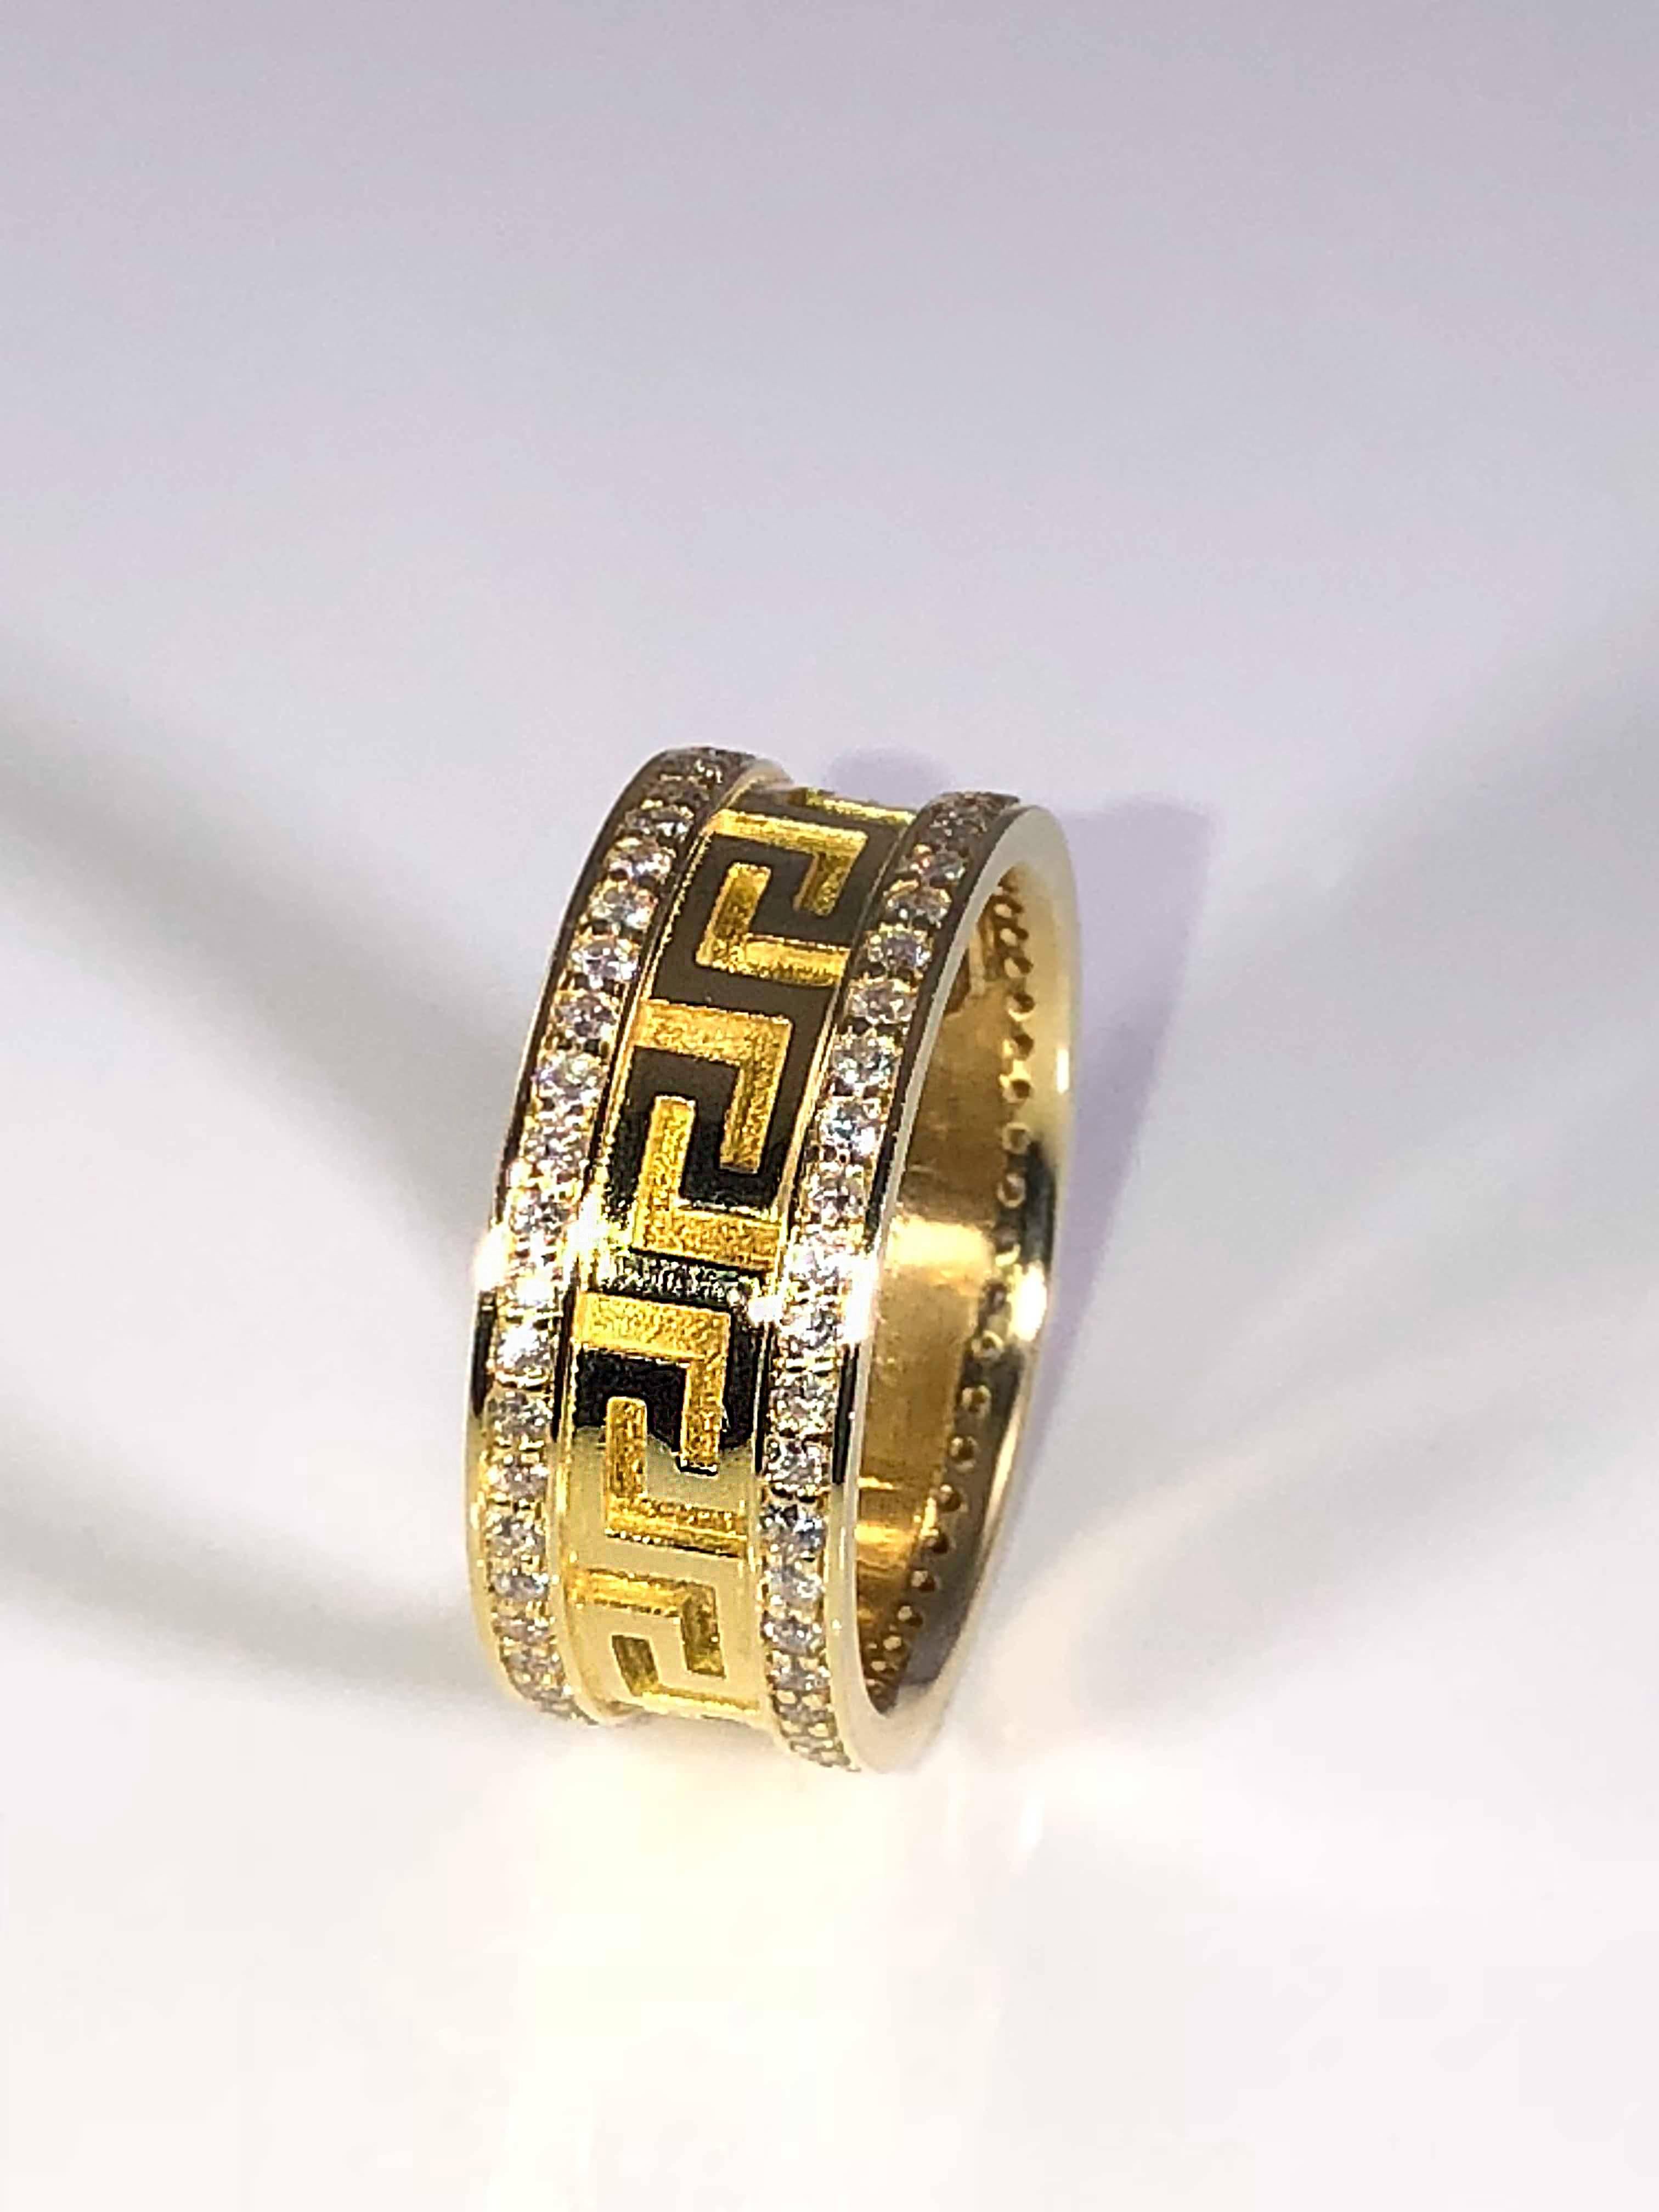 S.Georgios designer solid yellow gold 18 karat band is all handmade and has the design of the Greek Key all the way around without a beginning or an end. The design symbolizes the key to eternal life.
The ring has a unique velvet look on the